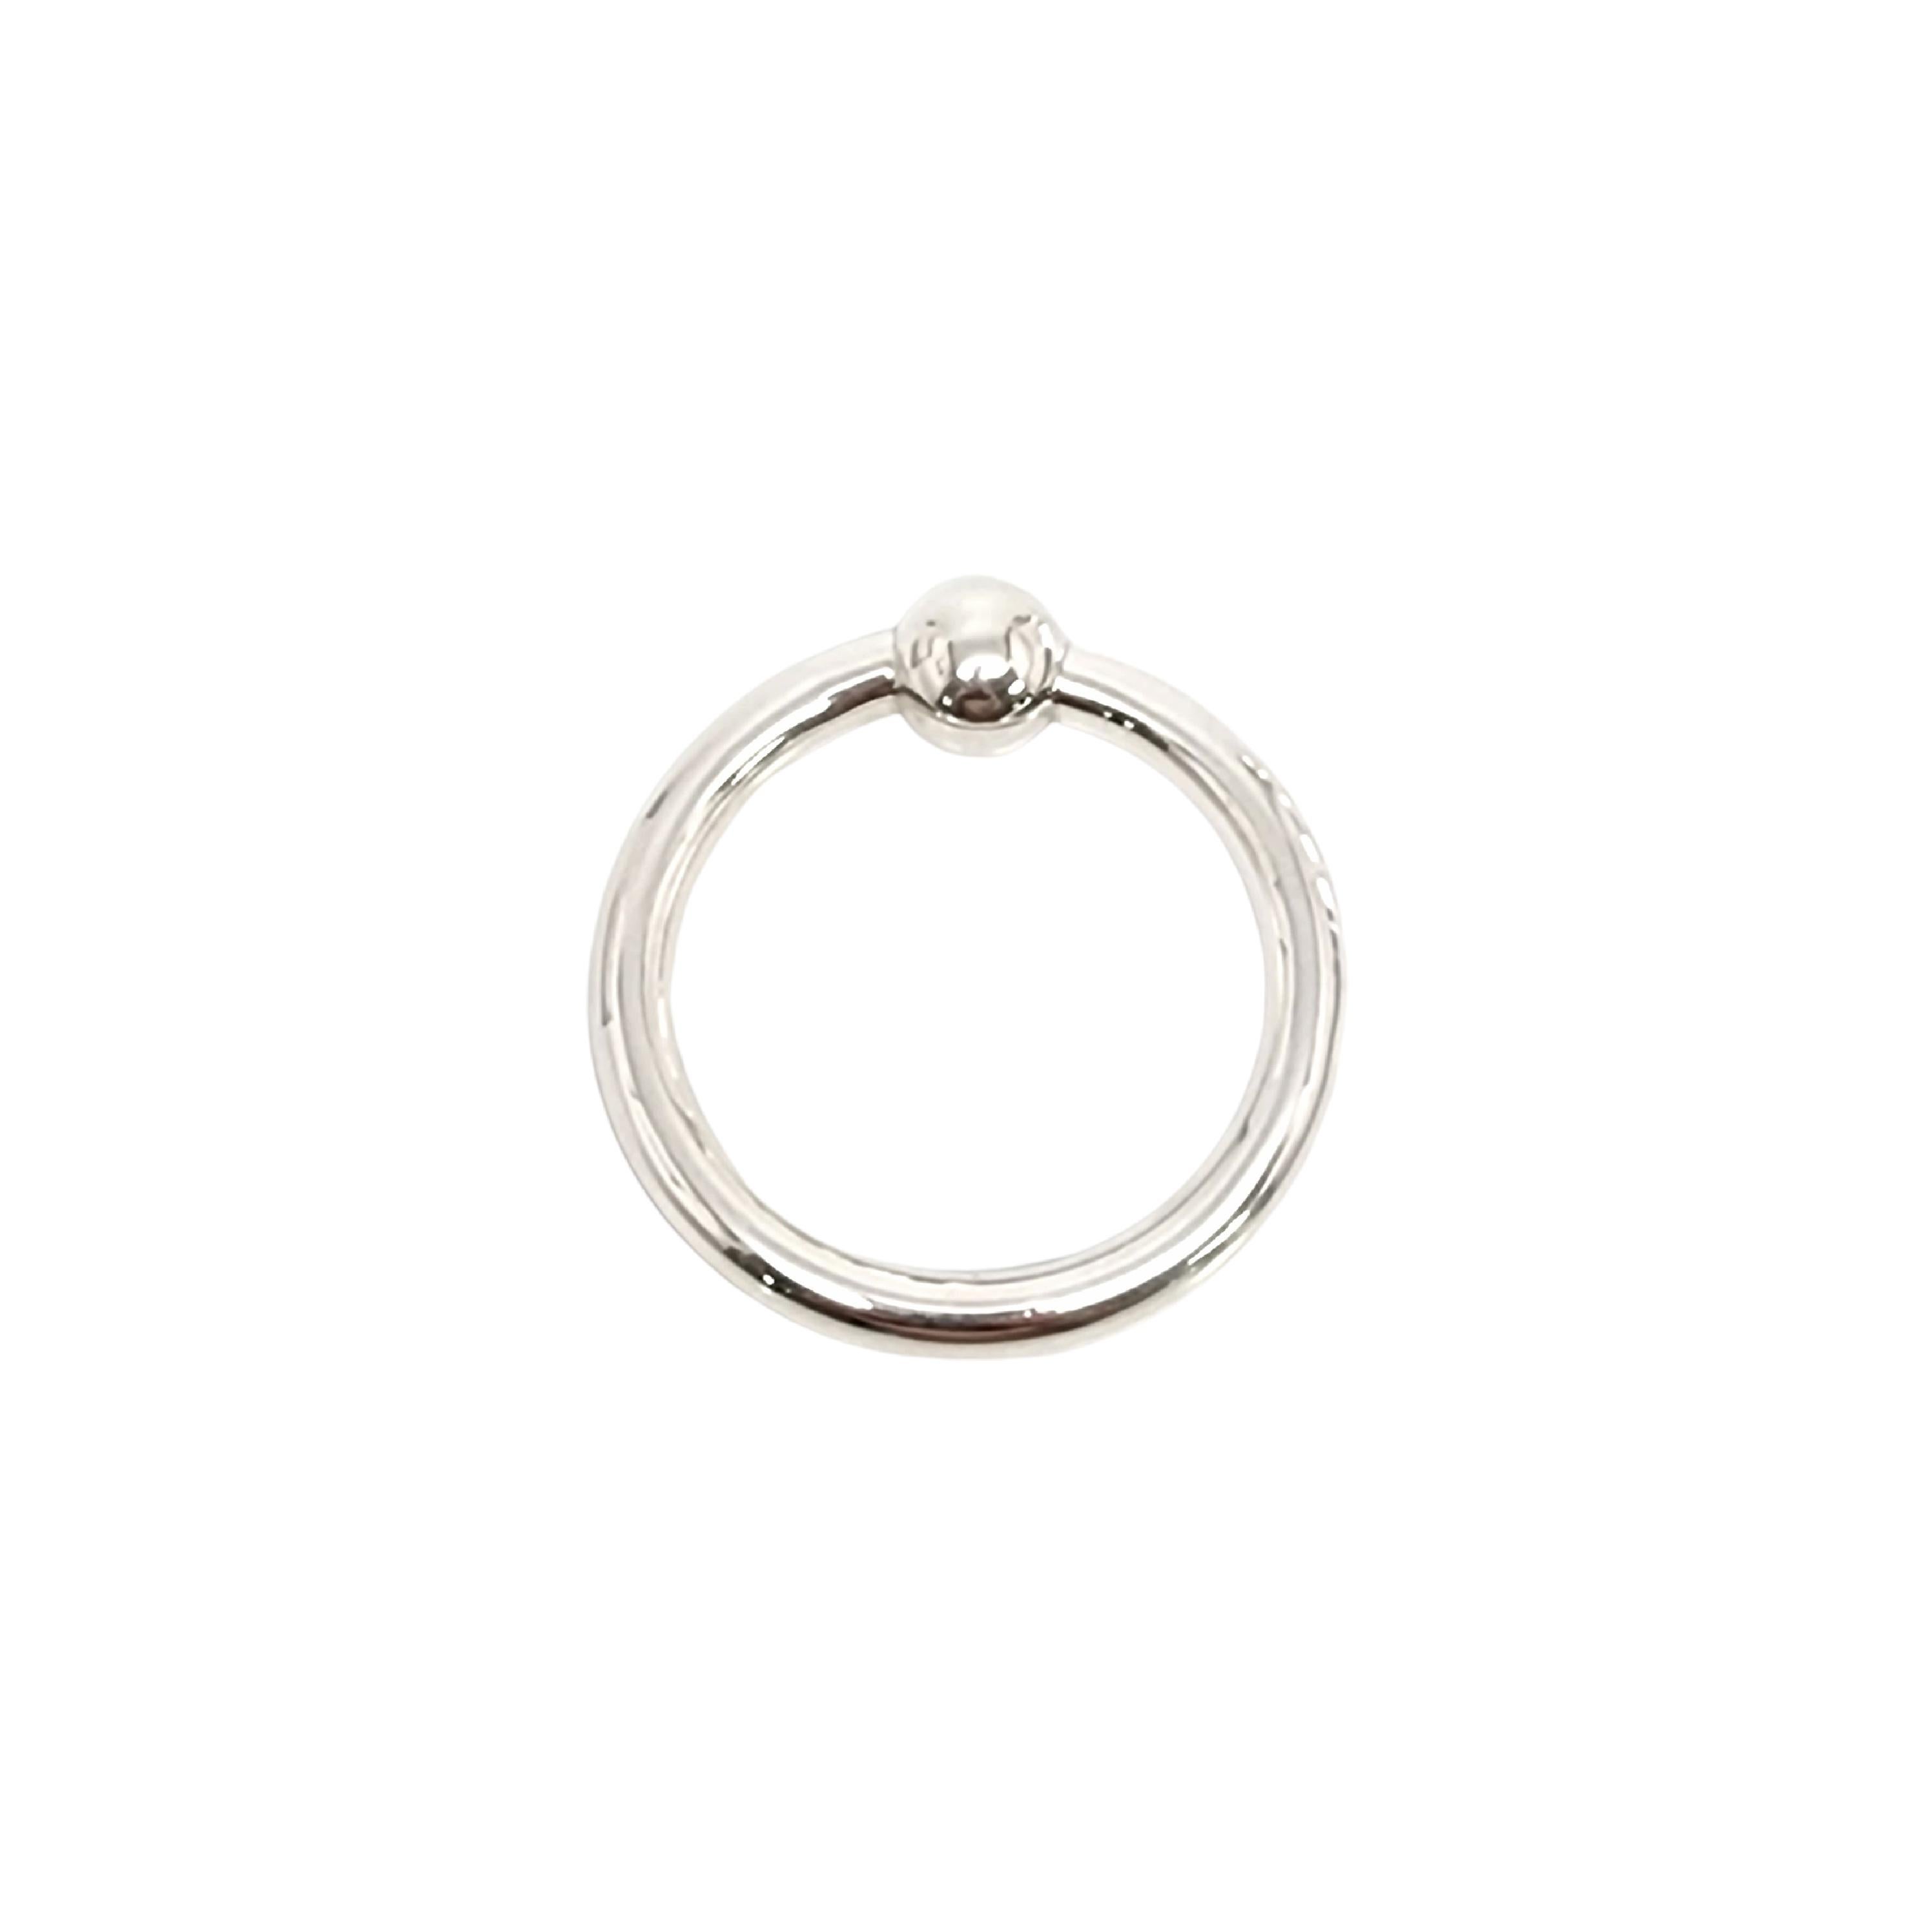 Tiffany & Co sterling silver circle ring rattle with pouch.

This is a beautiful and charming sterling silver circle ring baby rattle with a ball, a classic design by Tiffany & Co. It has a soft sweet jingle when you shake it. Includes Tiffany